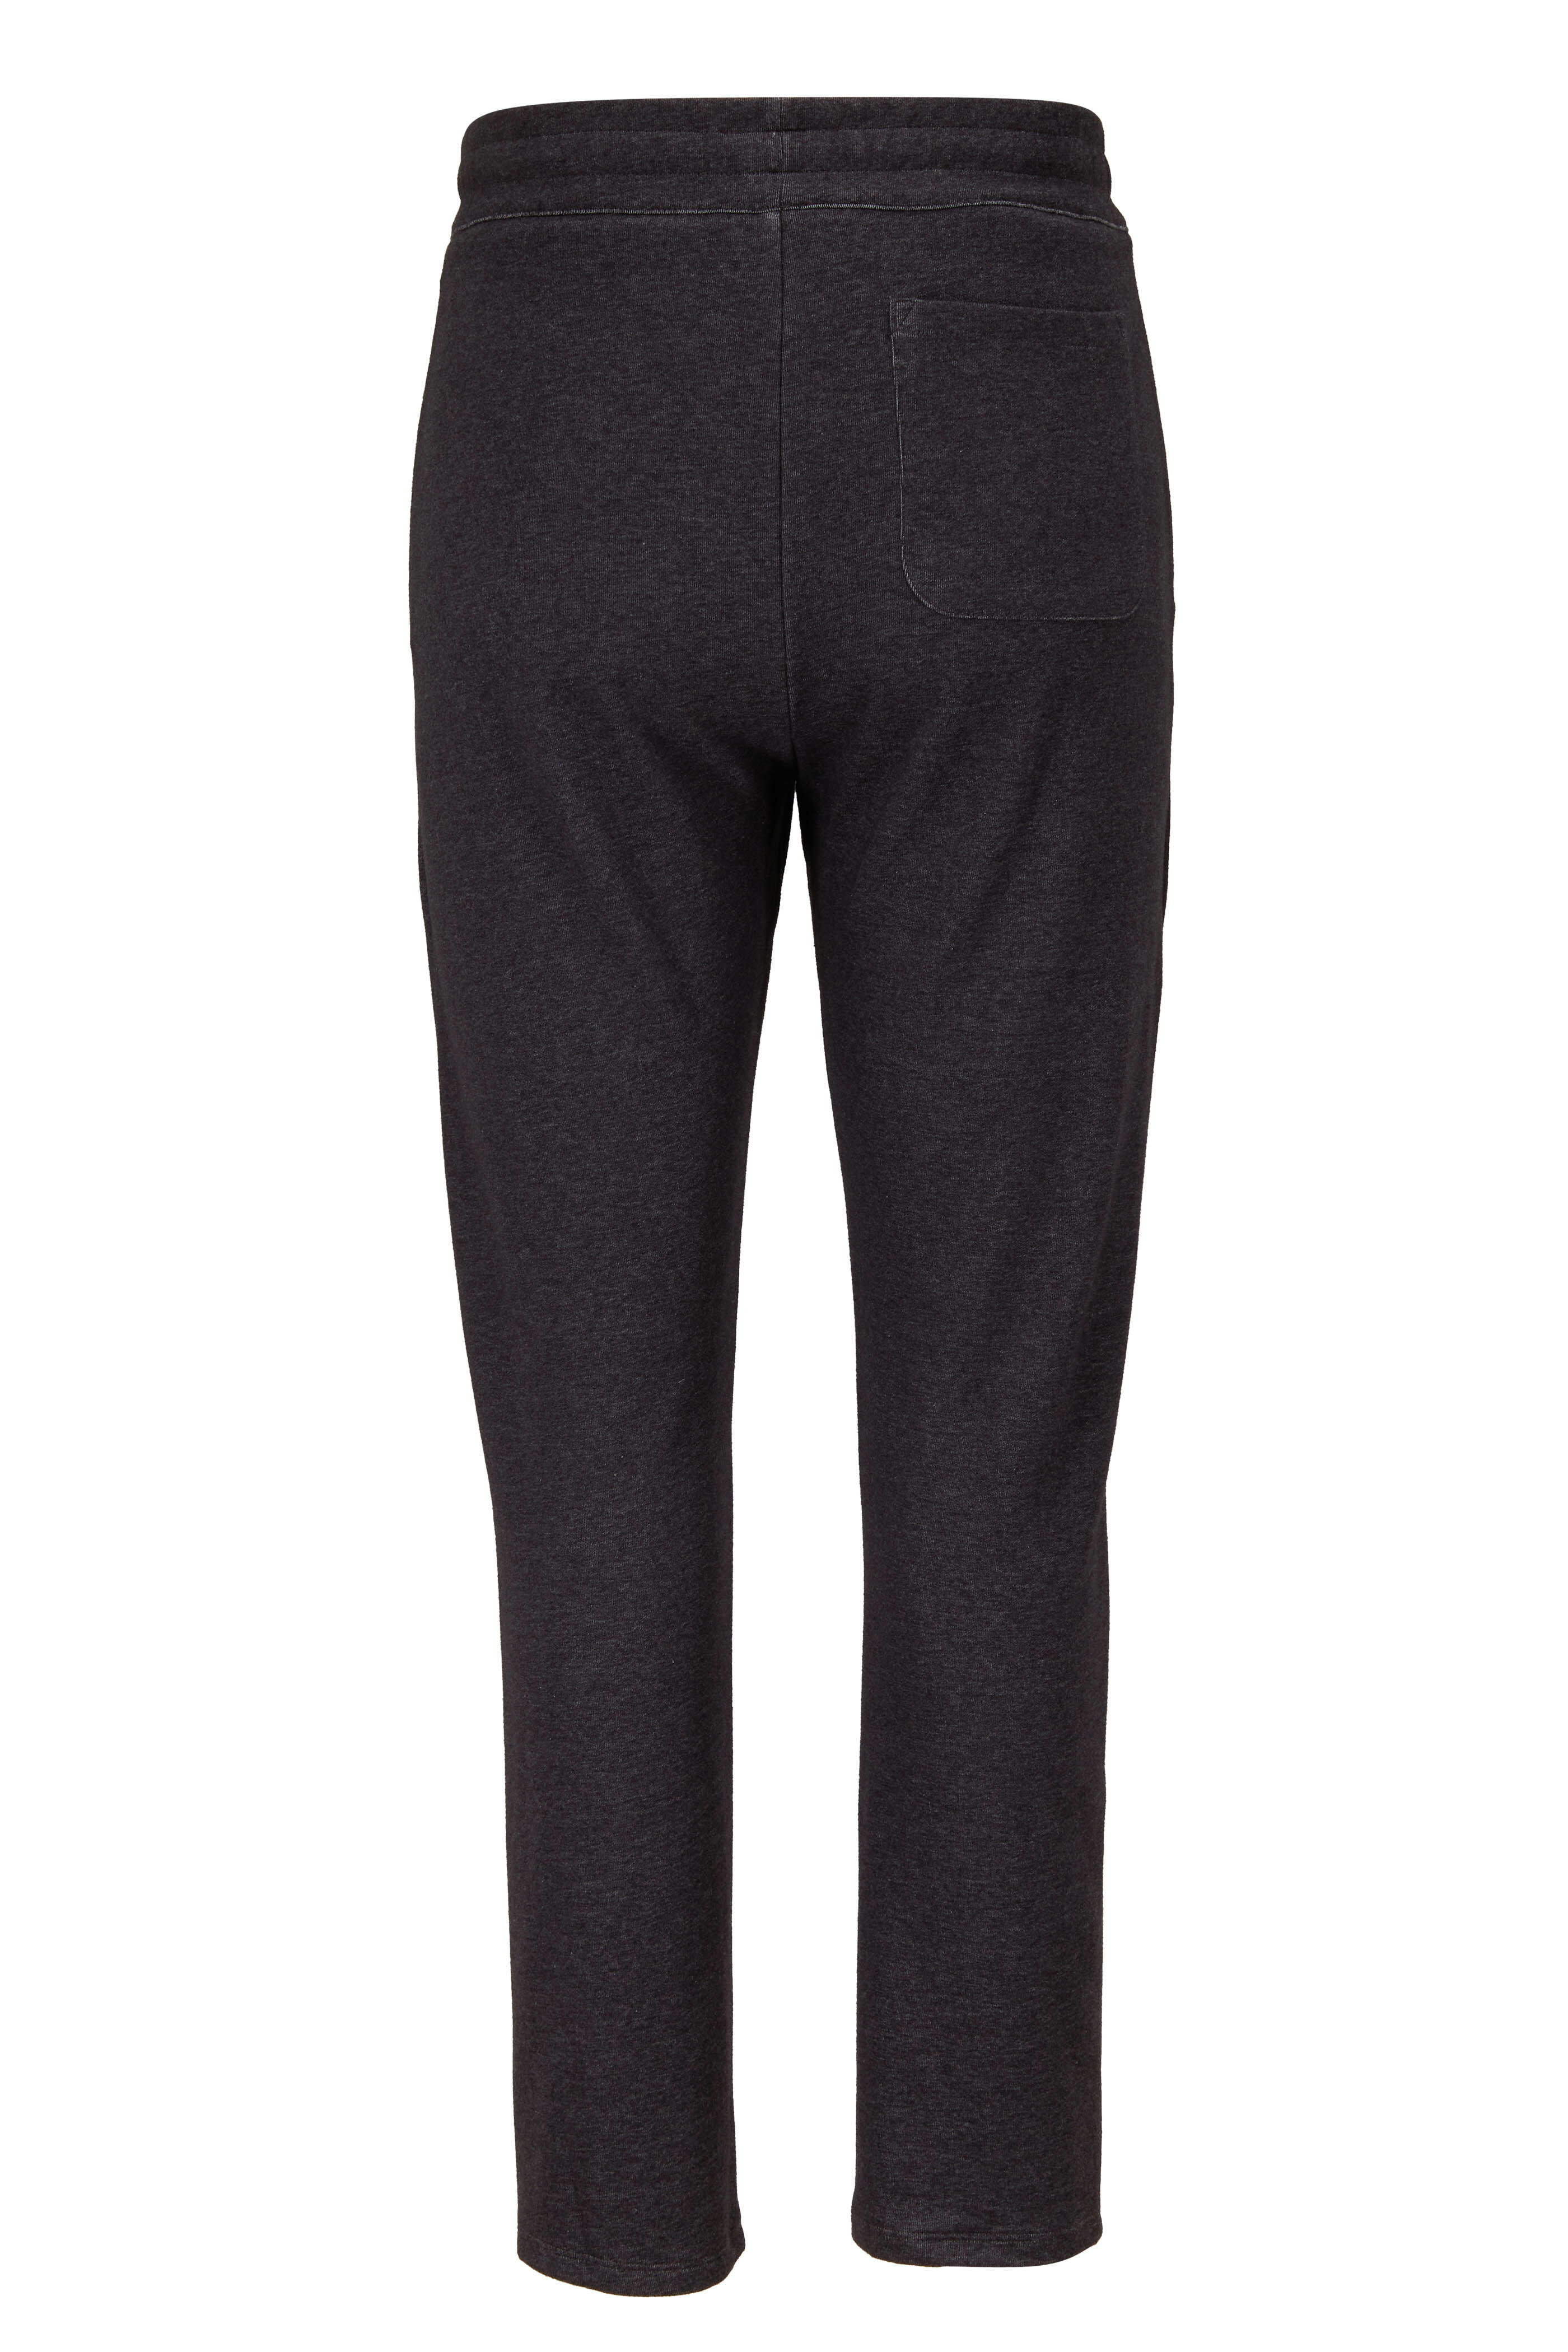 Vince - Heather Black Double Knit Cozy Jogger | Mitchell Stores